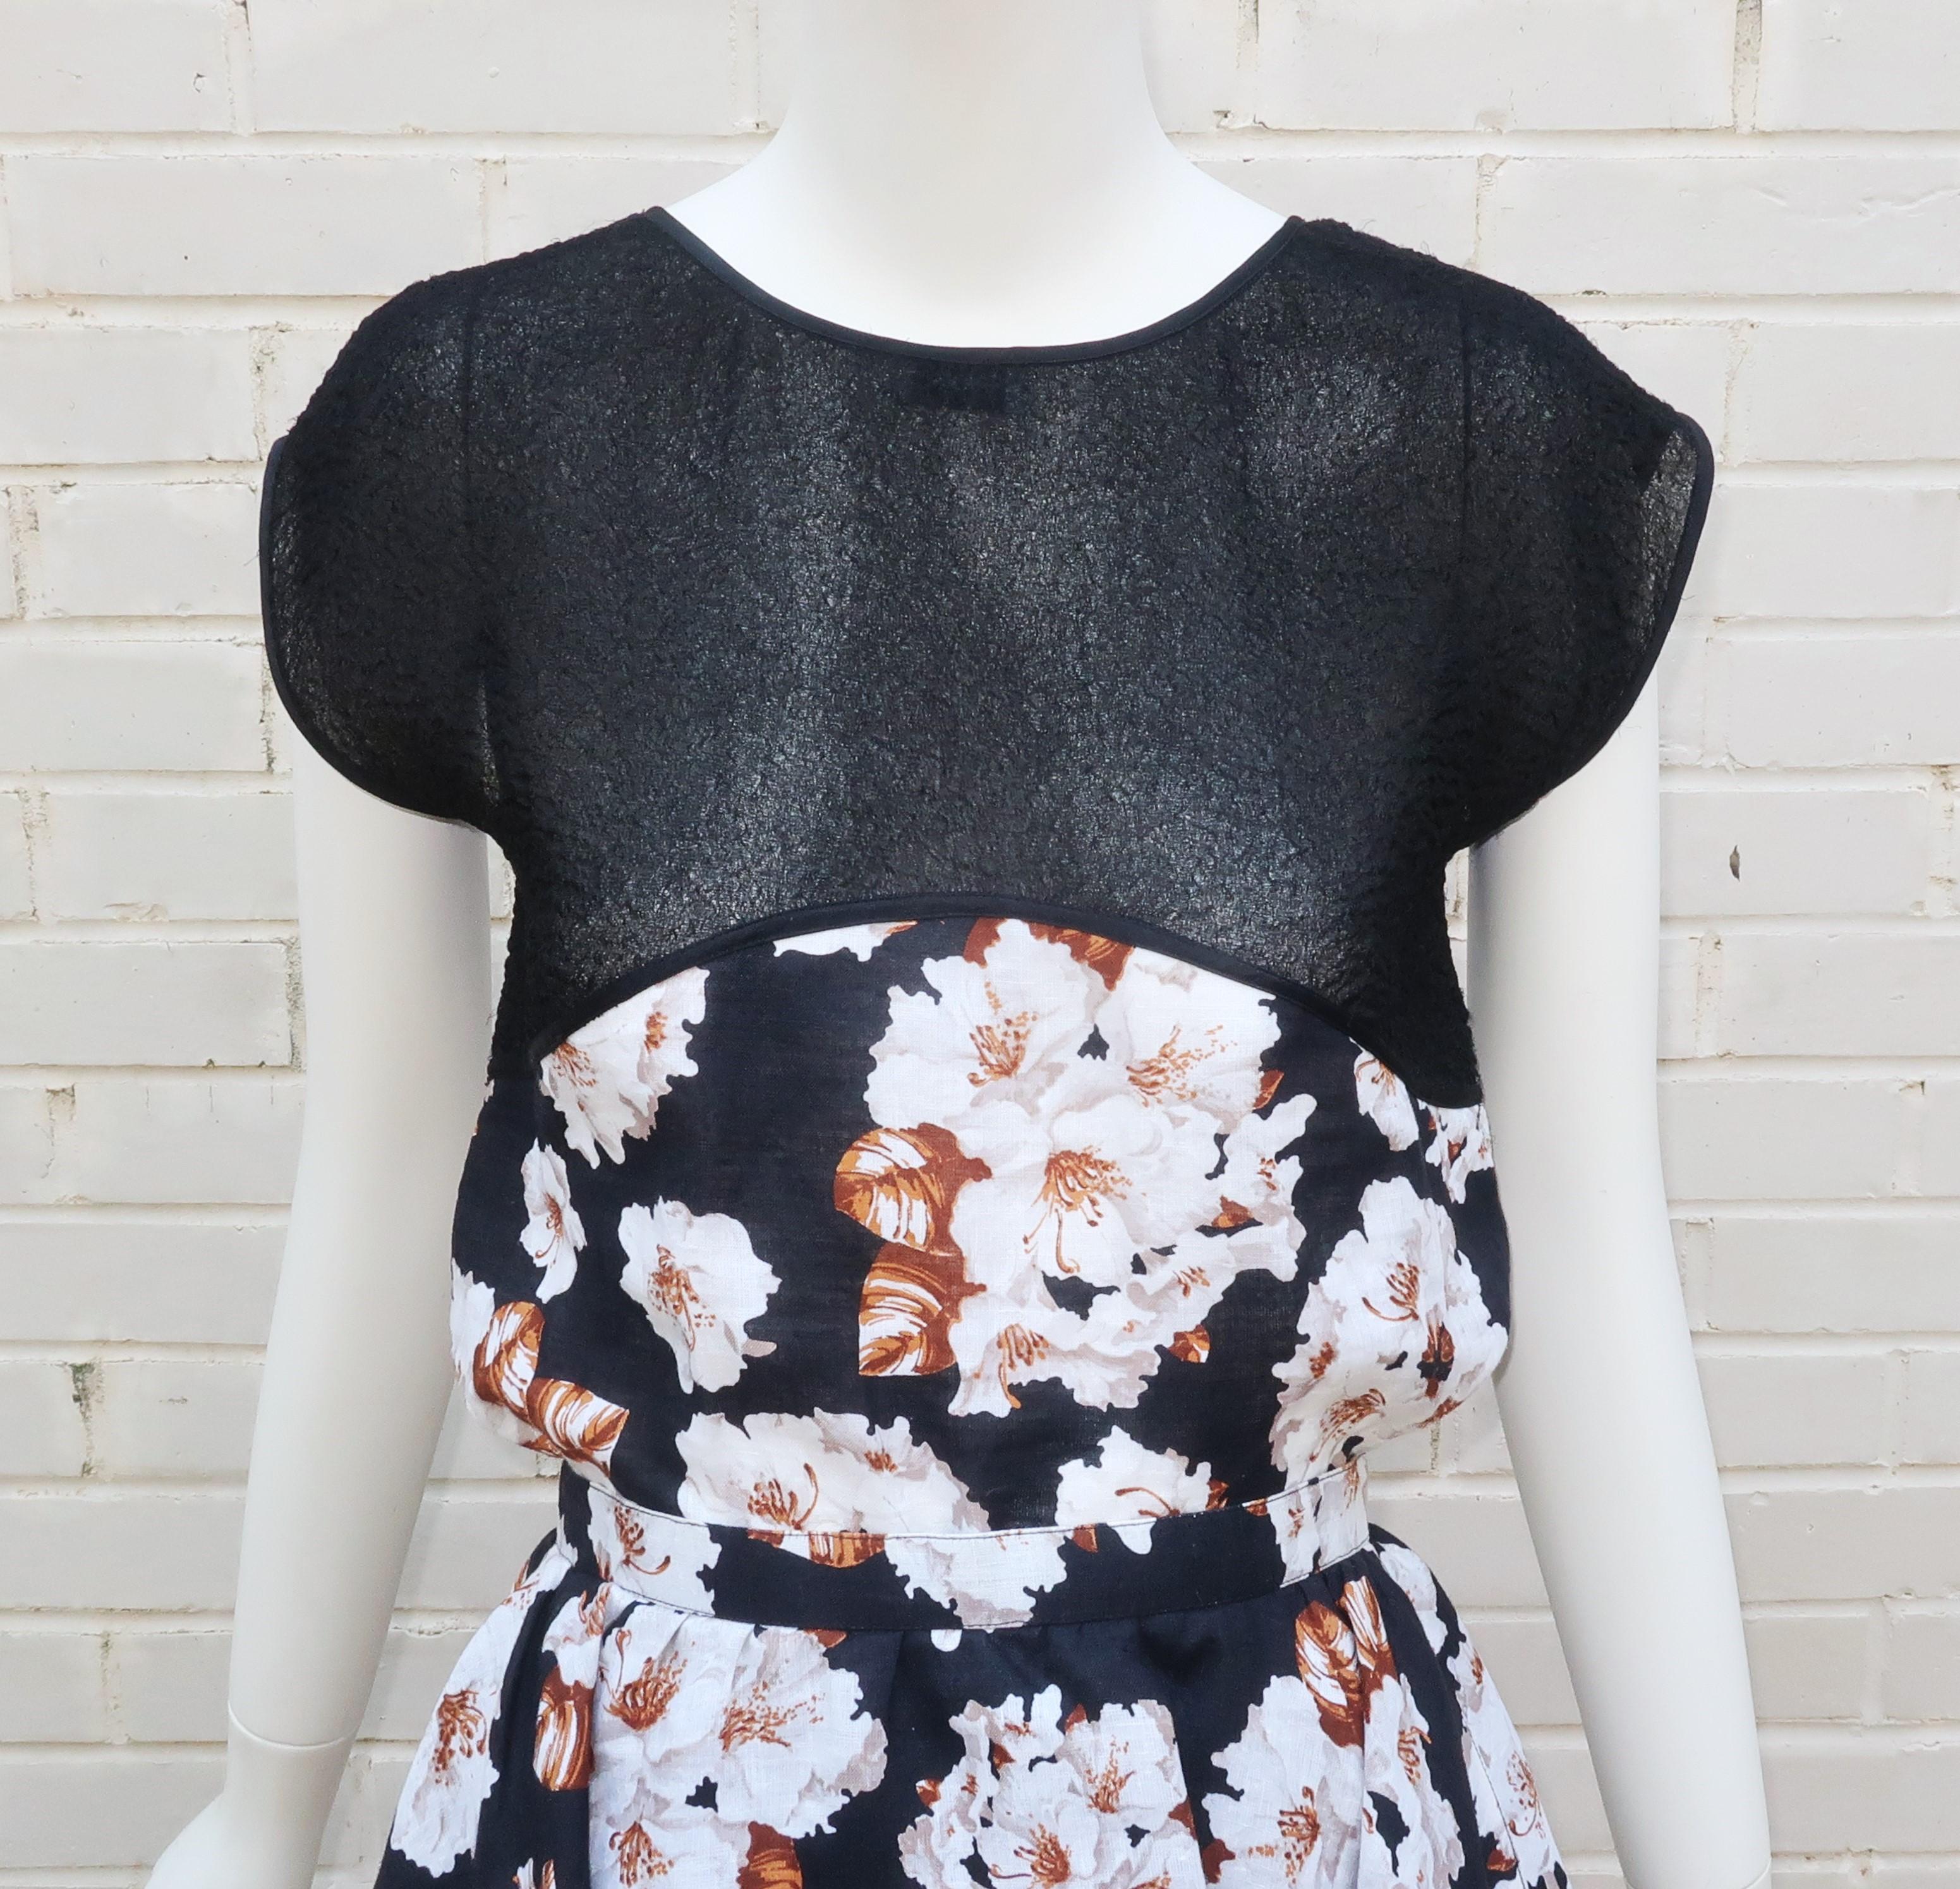 This 1970's Geoffrey Beene two piece dress ensemble is a vision of loveliness.  Both pieces are are a combination of a unique puckered black sheer fabric and a floral linen depicting white flowers with brown accents.  The pullover boxy top scoops